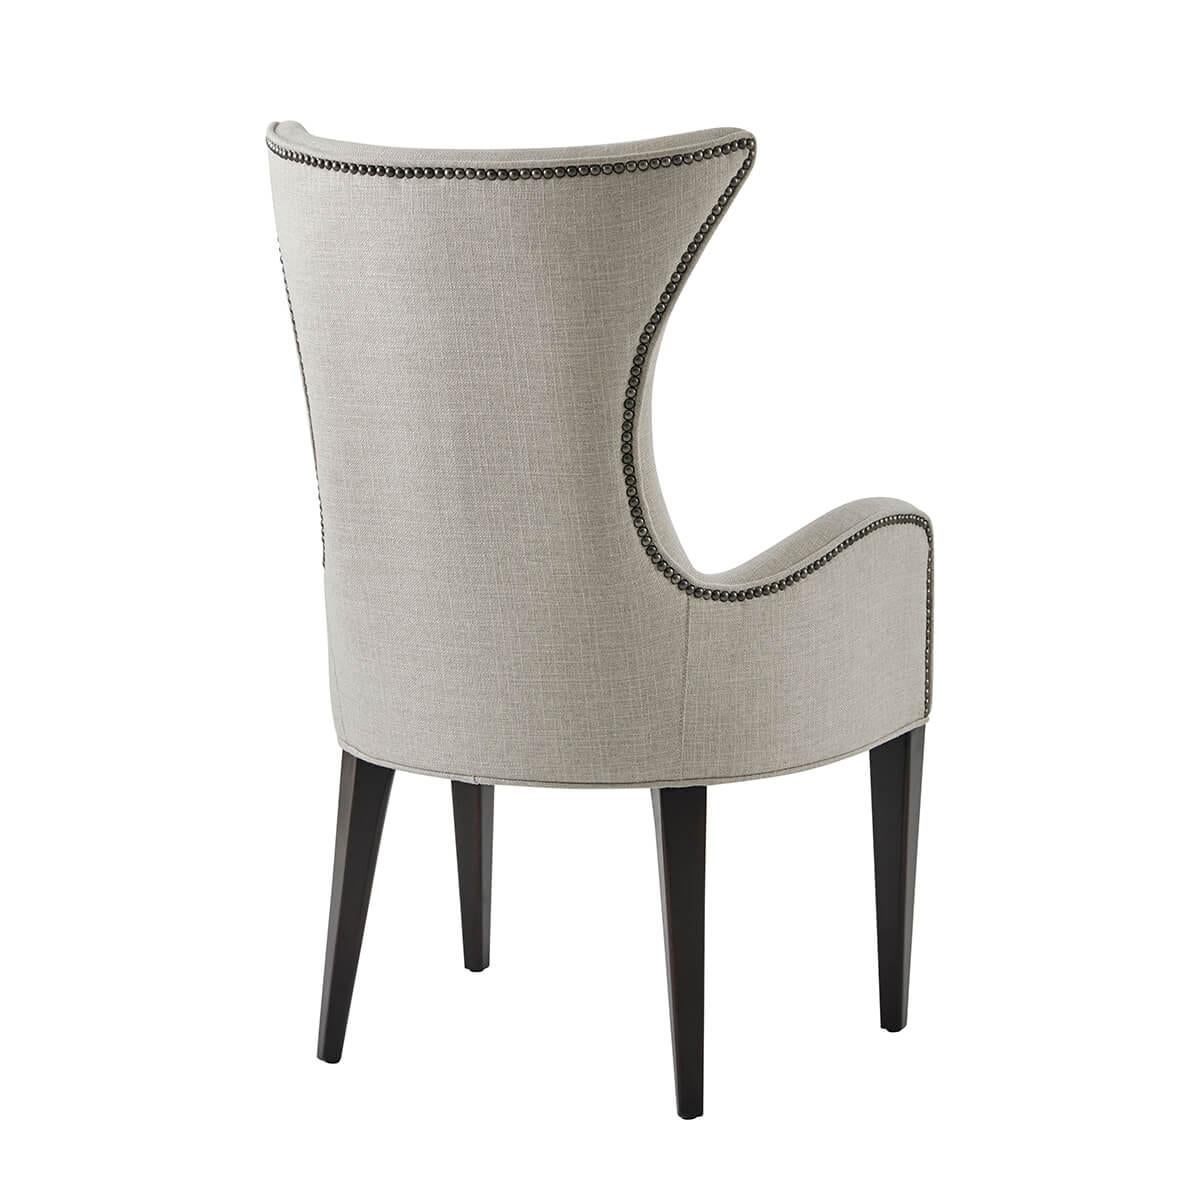 An ebonized and upholstered dining chair, the waisted curved back, above a tight seat and padded arms, on square tapering legs. With a performance fabric and antiqued steel nailheads.

Dimensions: 24.5